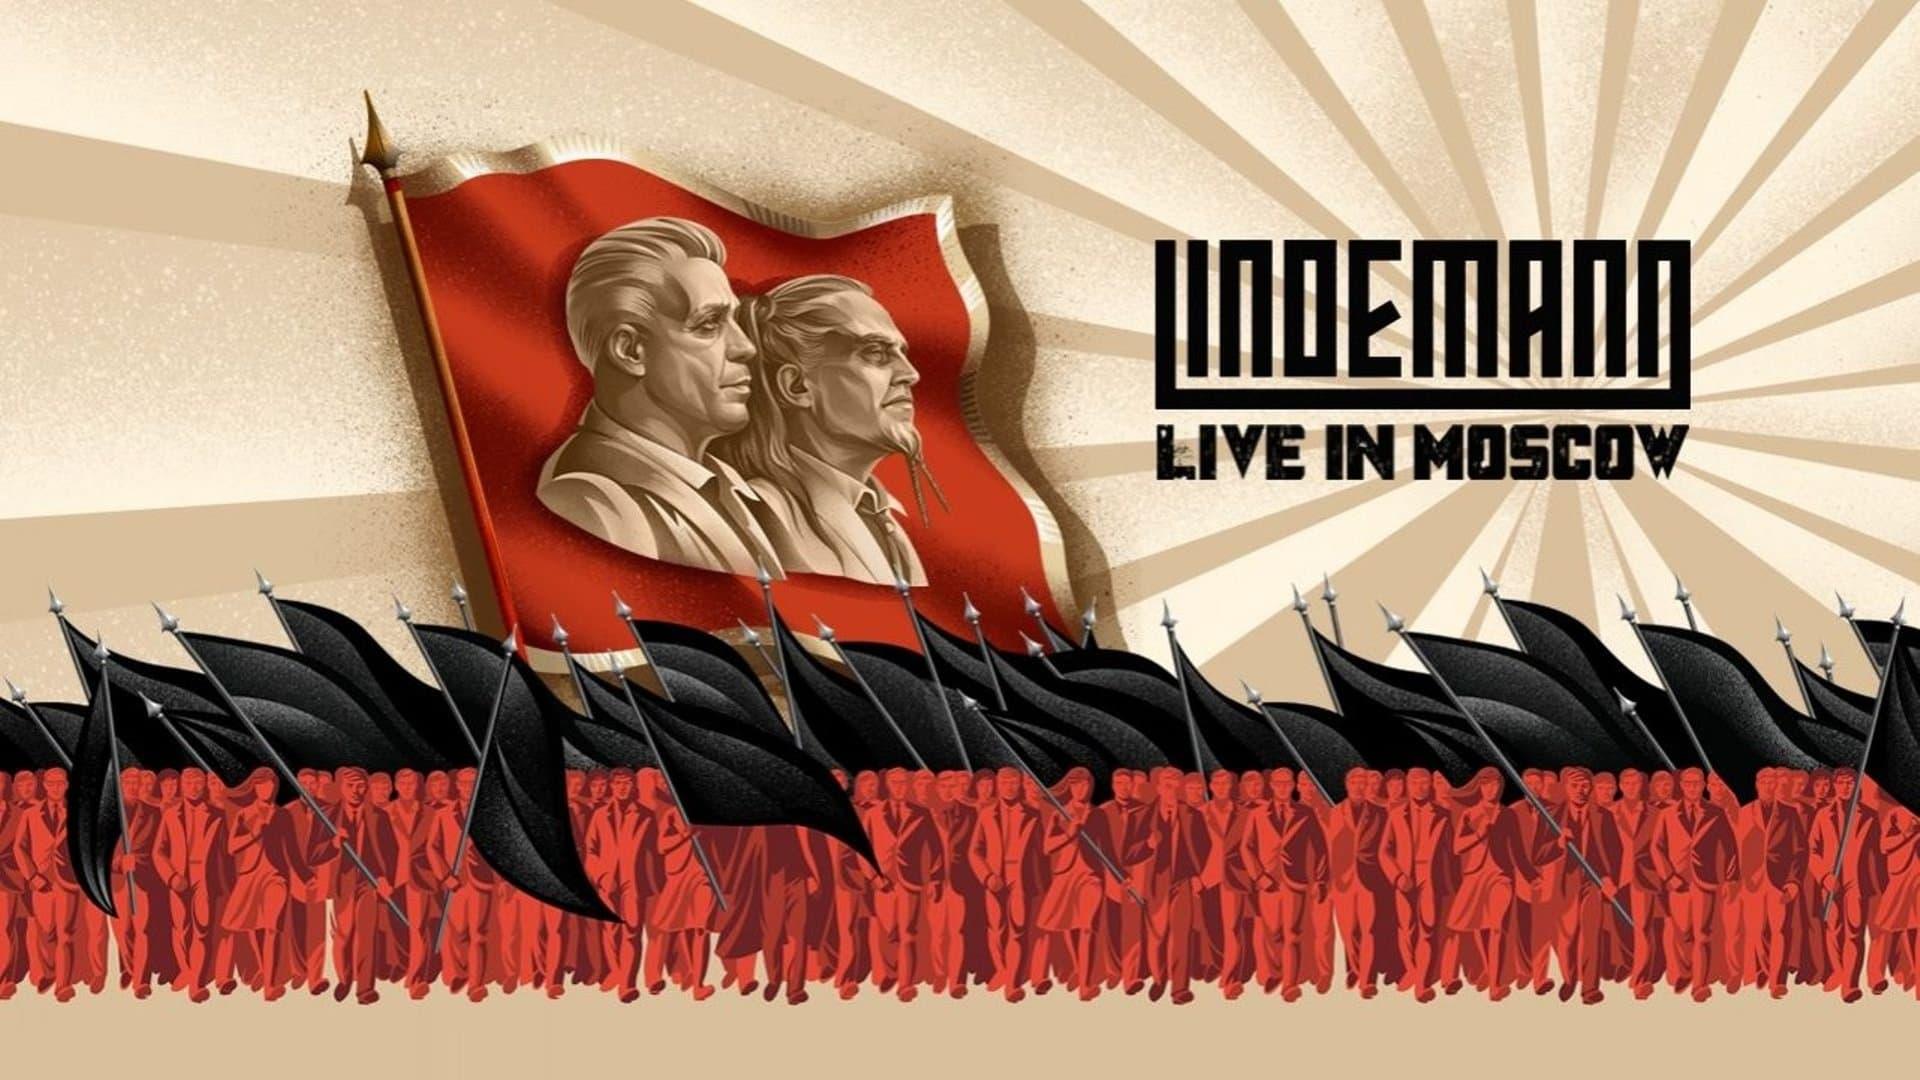 Lindemann: Live in Moscow backdrop